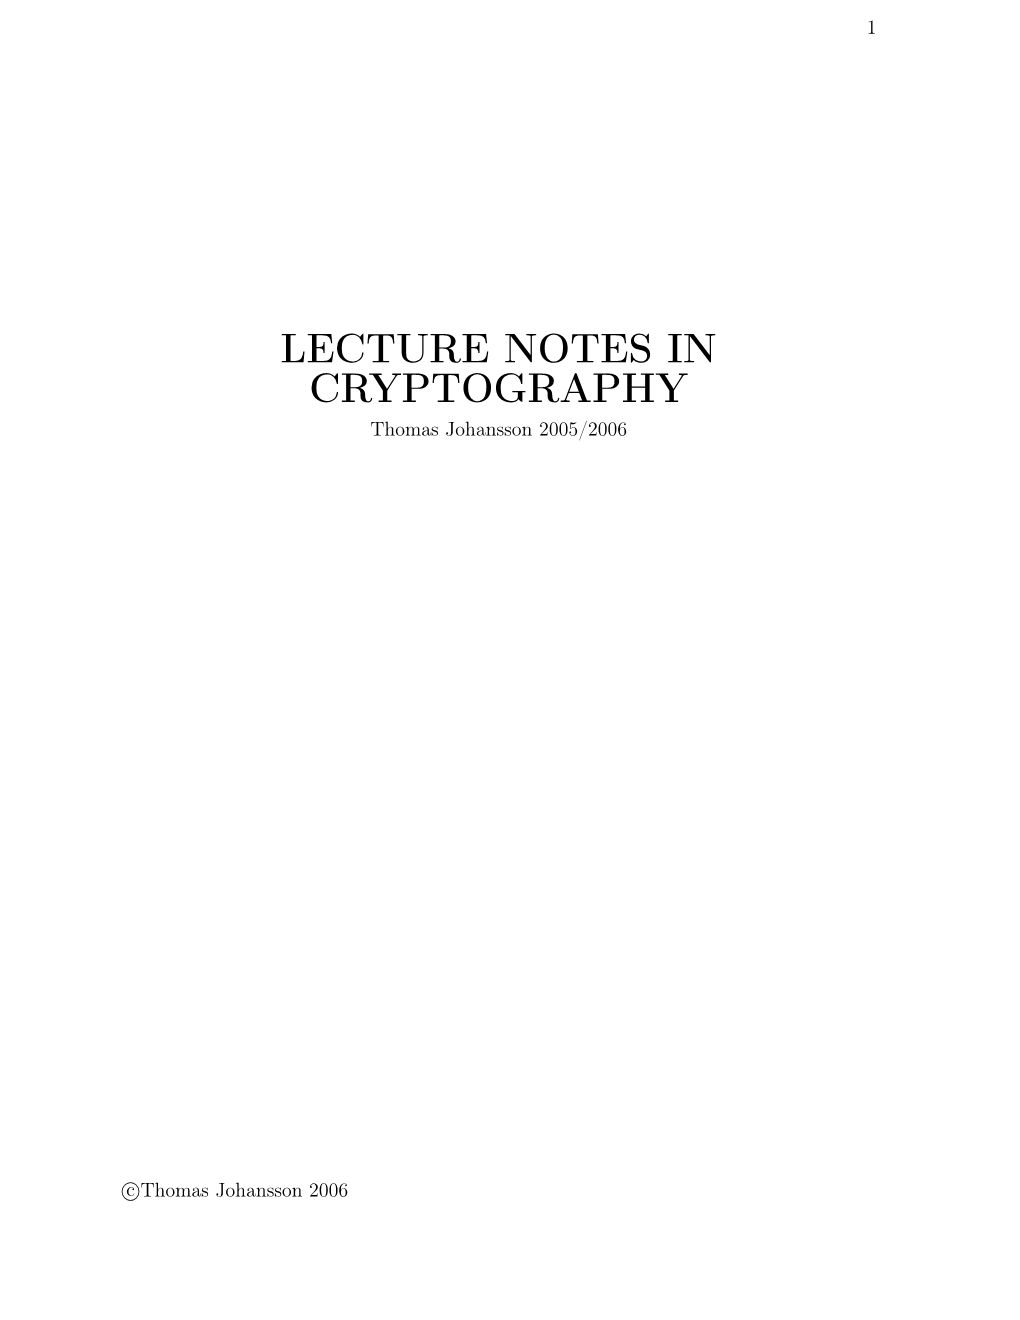 LECTURE NOTES in CRYPTOGRAPHY Thomas Johansson 2005/2006